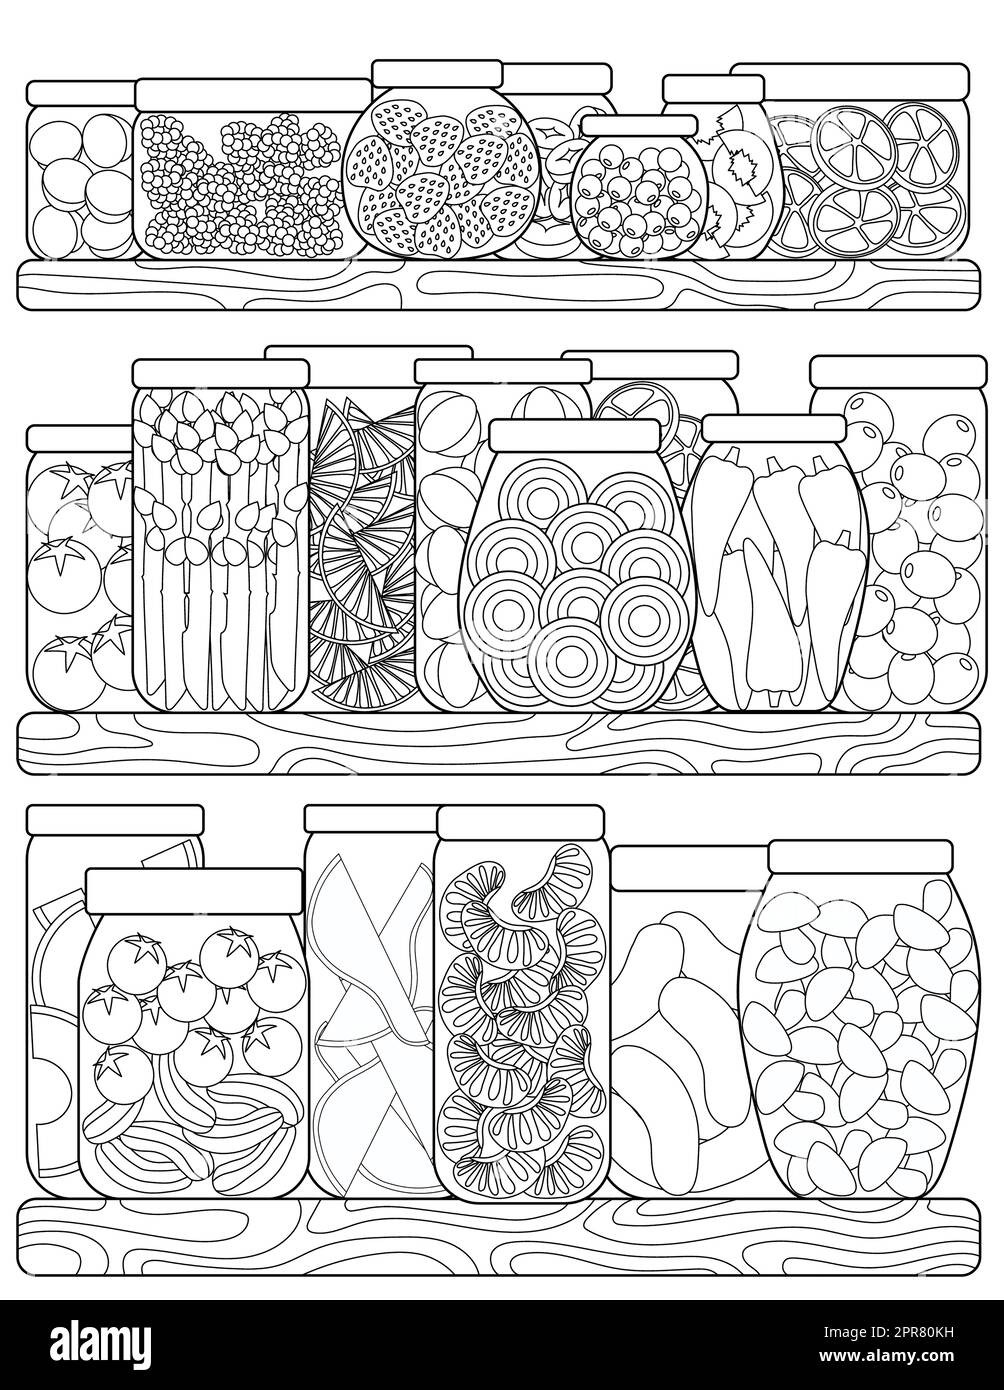 https://c8.alamy.com/comp/2PR80KH/coloring-page-with-shelves-full-with-fruits-and-vegetables-in-jars-2PR80KH.jpg